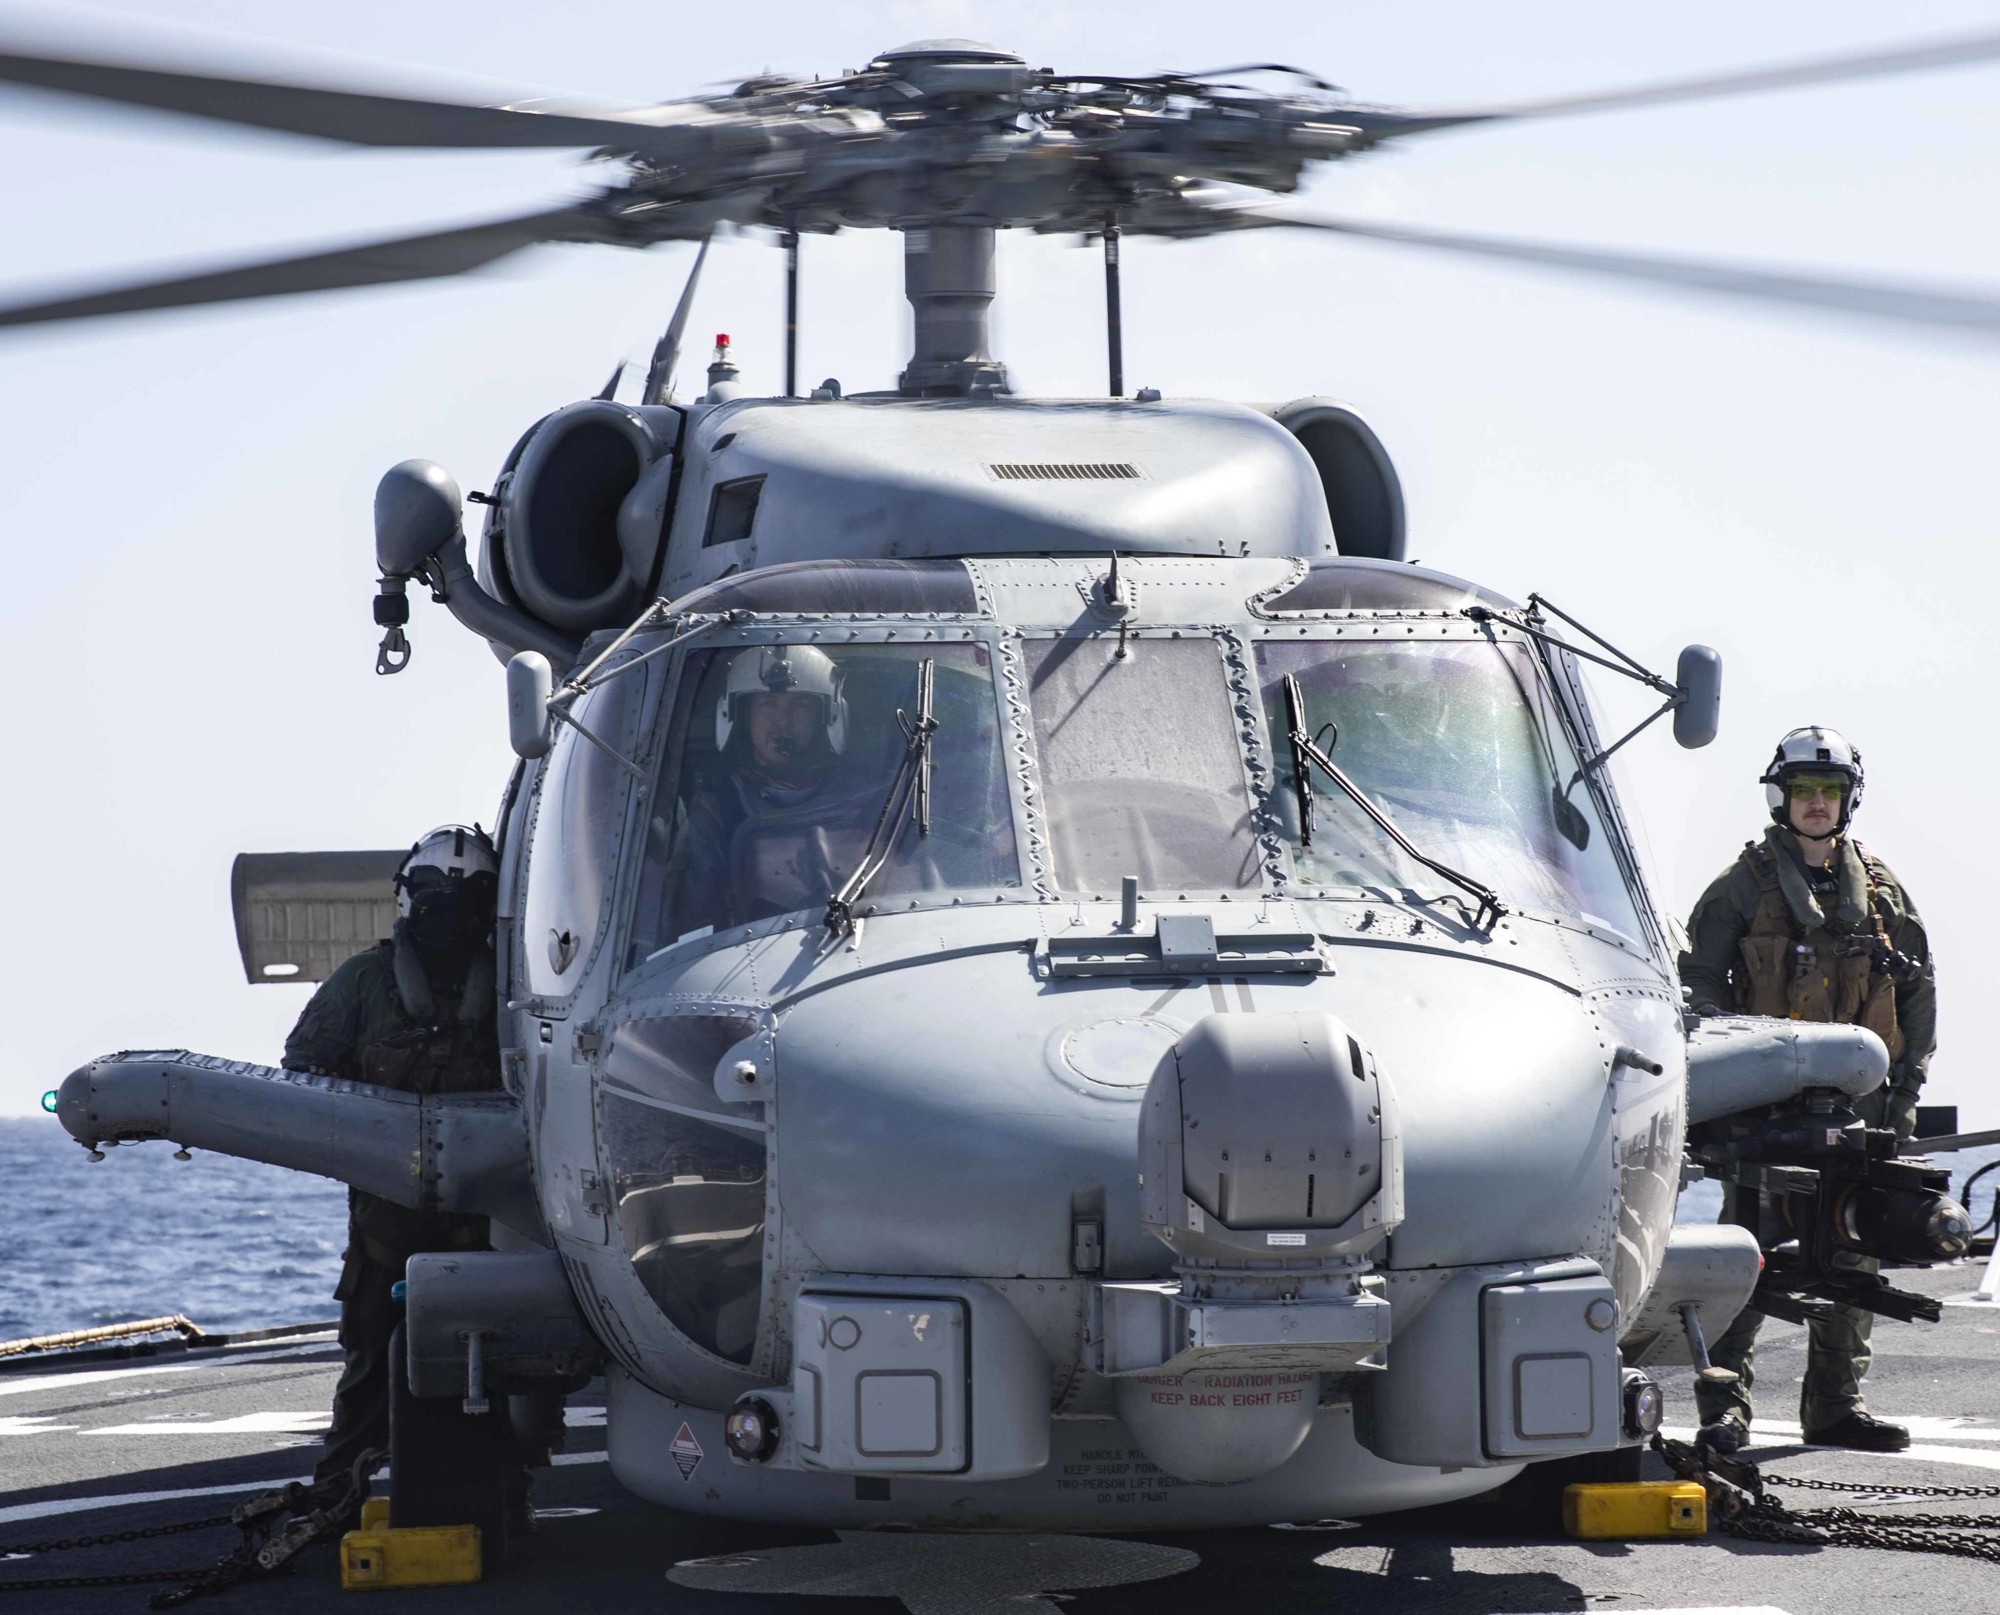 hsm-74 swamp foxes helicopter maritime strike squadron mh-60r seahawk ddg-78 uss porter 112